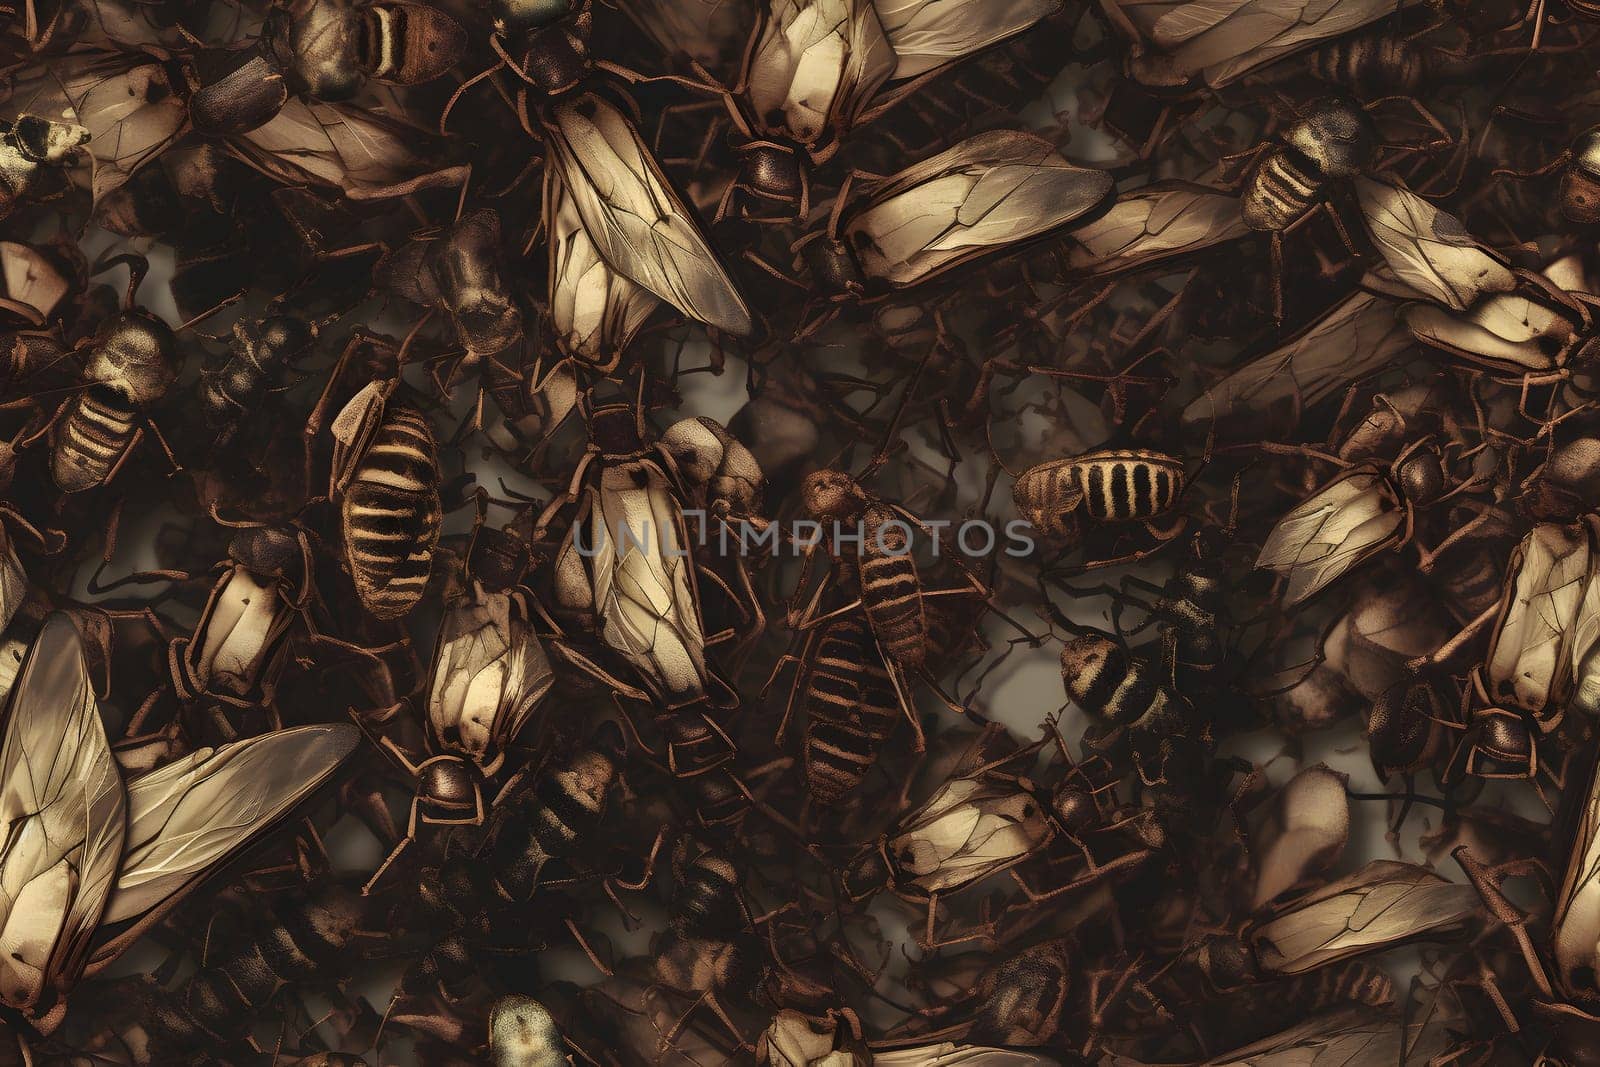 seamless texture and background of pile of bugs, neural network generated photorealistic image by z1b